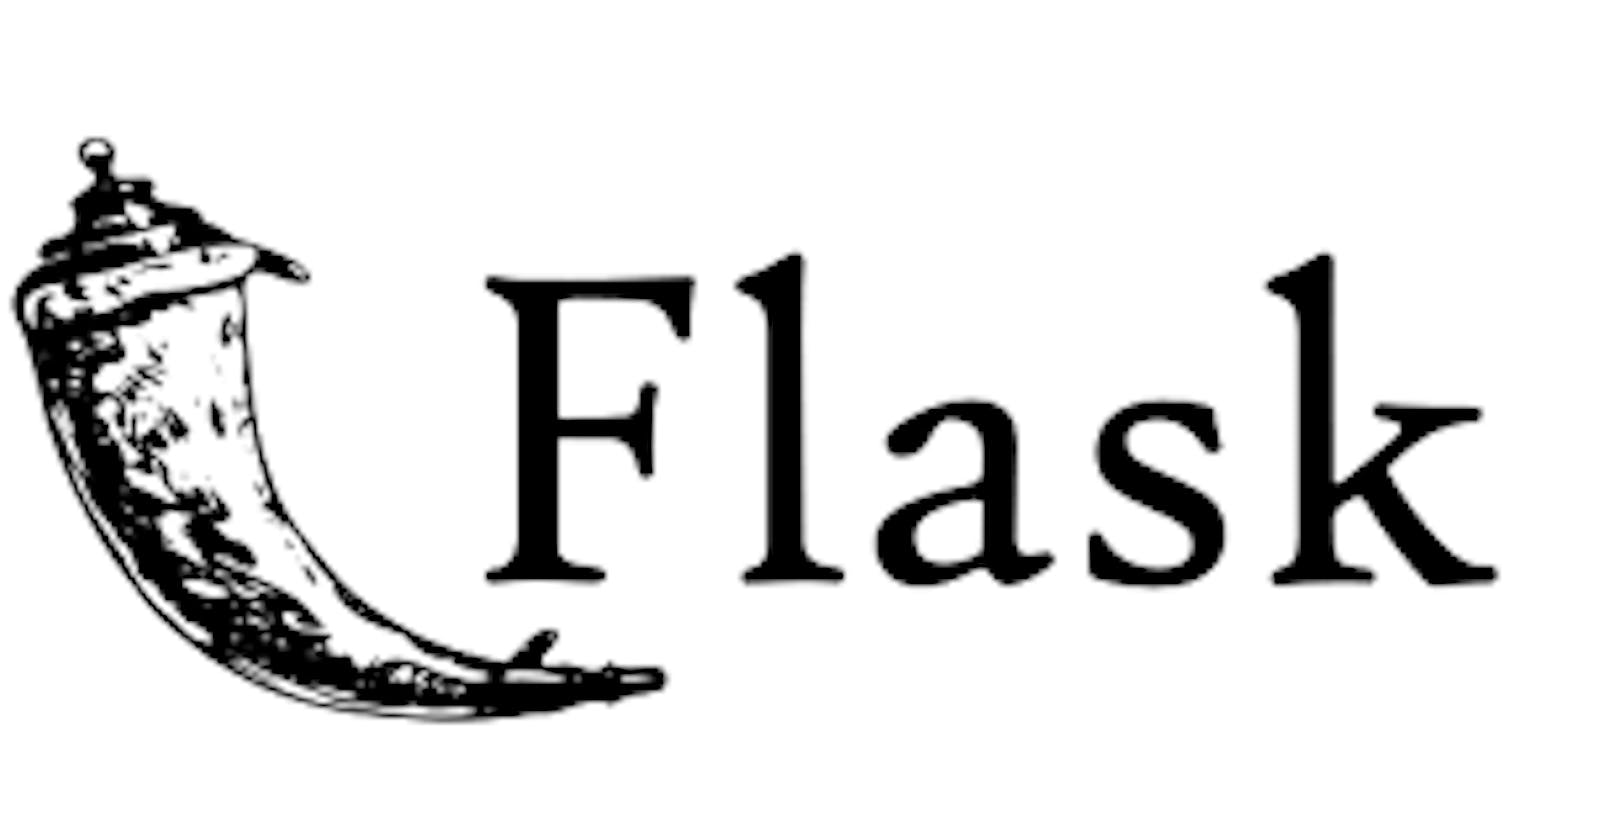 How To Link External Files in Flask Application